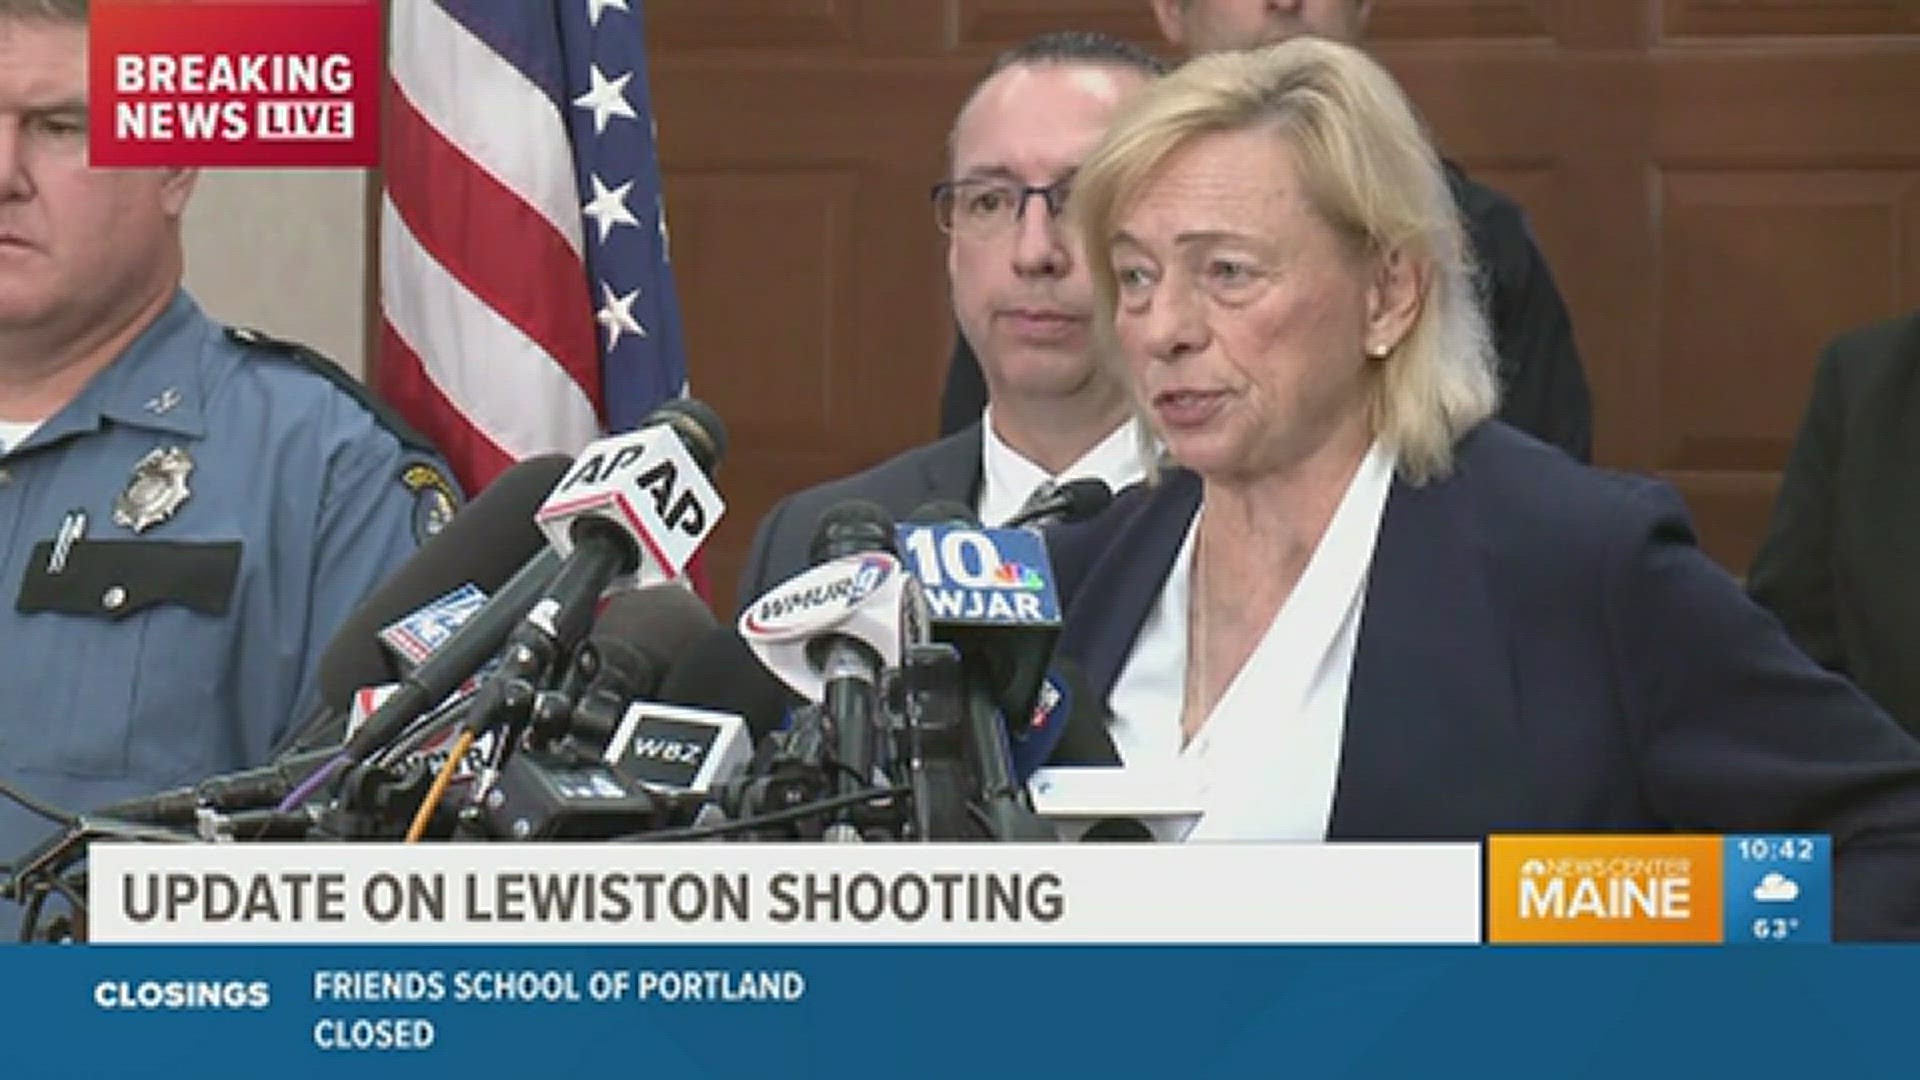 The governor revealed that 18 people were killed and 13 injured in the Wednesday night shootings at two locations in Lewiston.